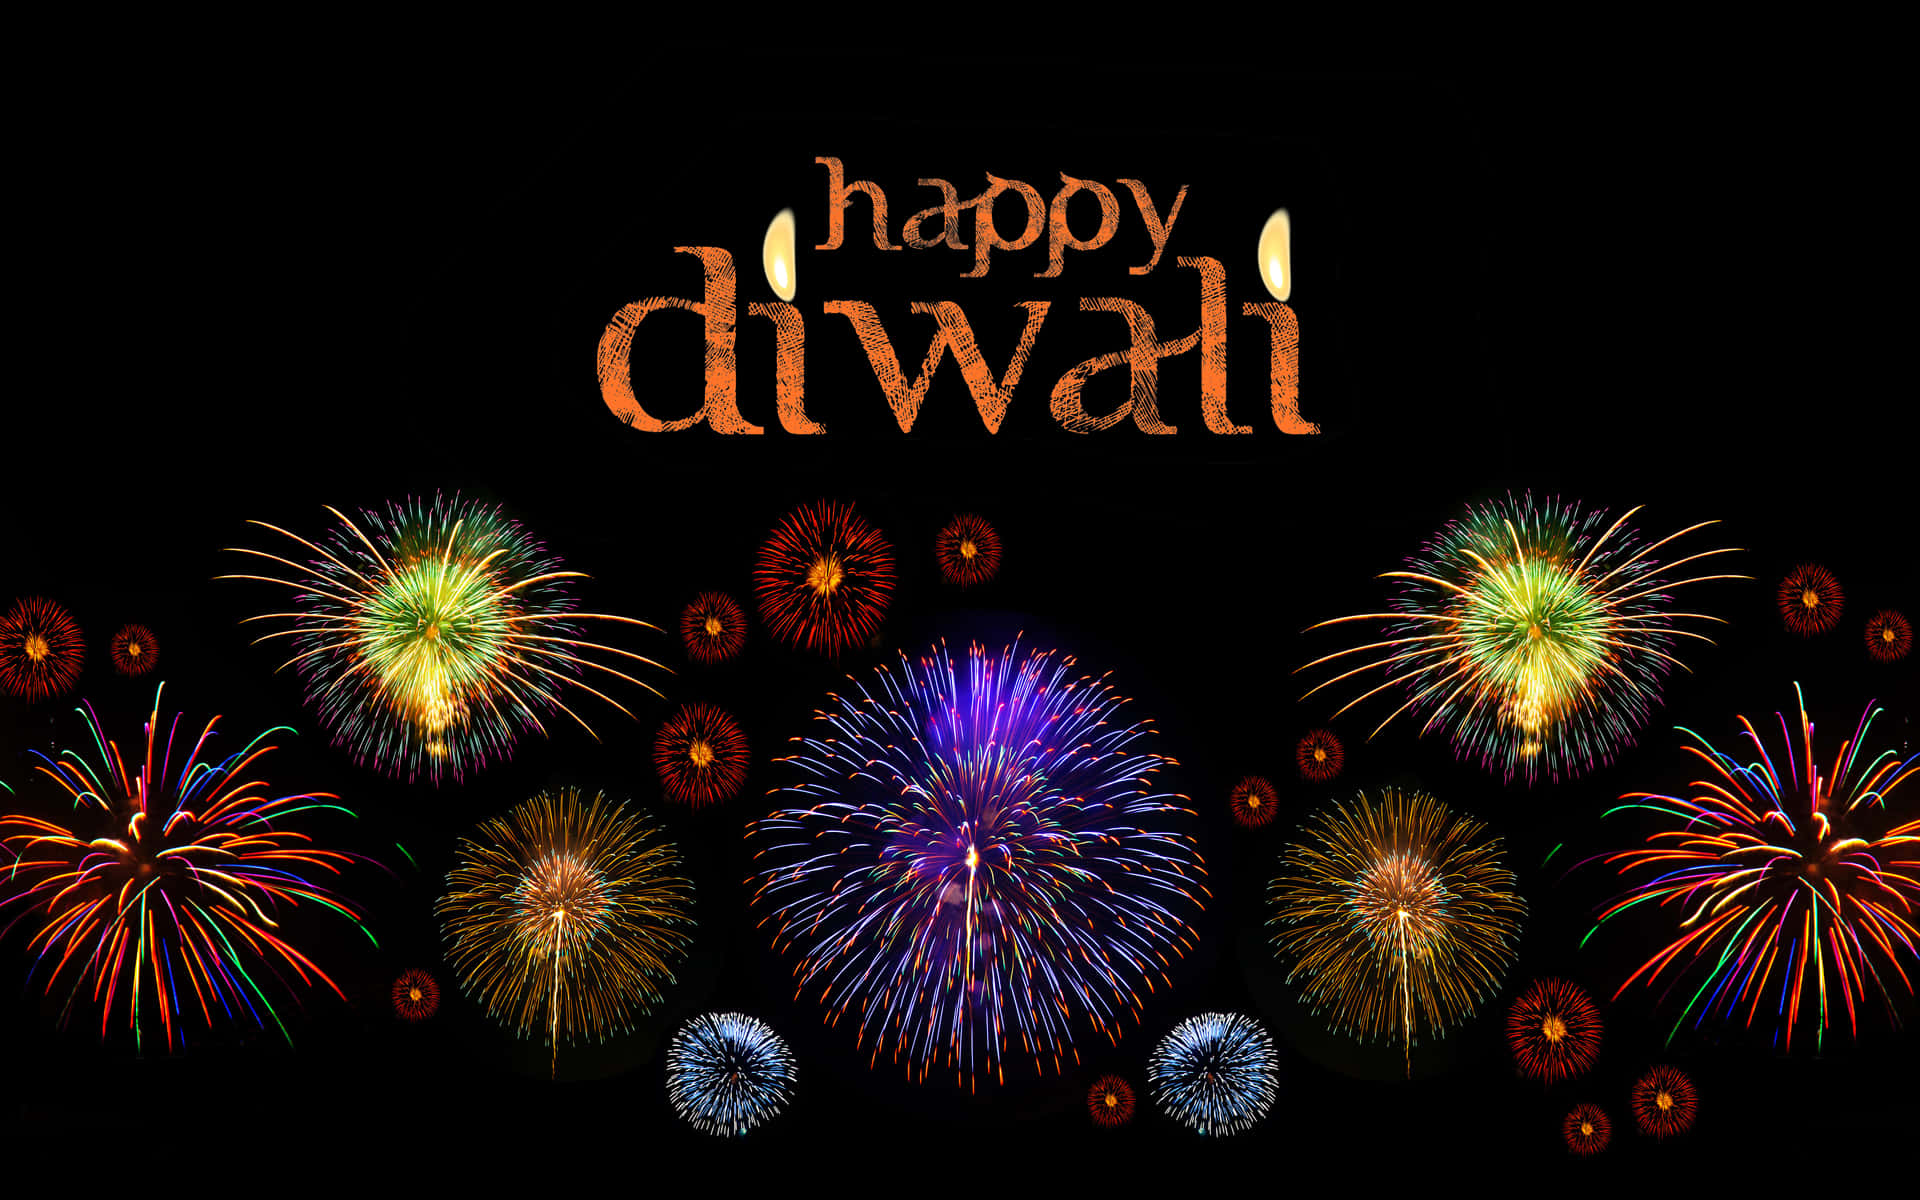 "Happy Diwali!", an Indian festival of lights celebrated by millions of people around the world